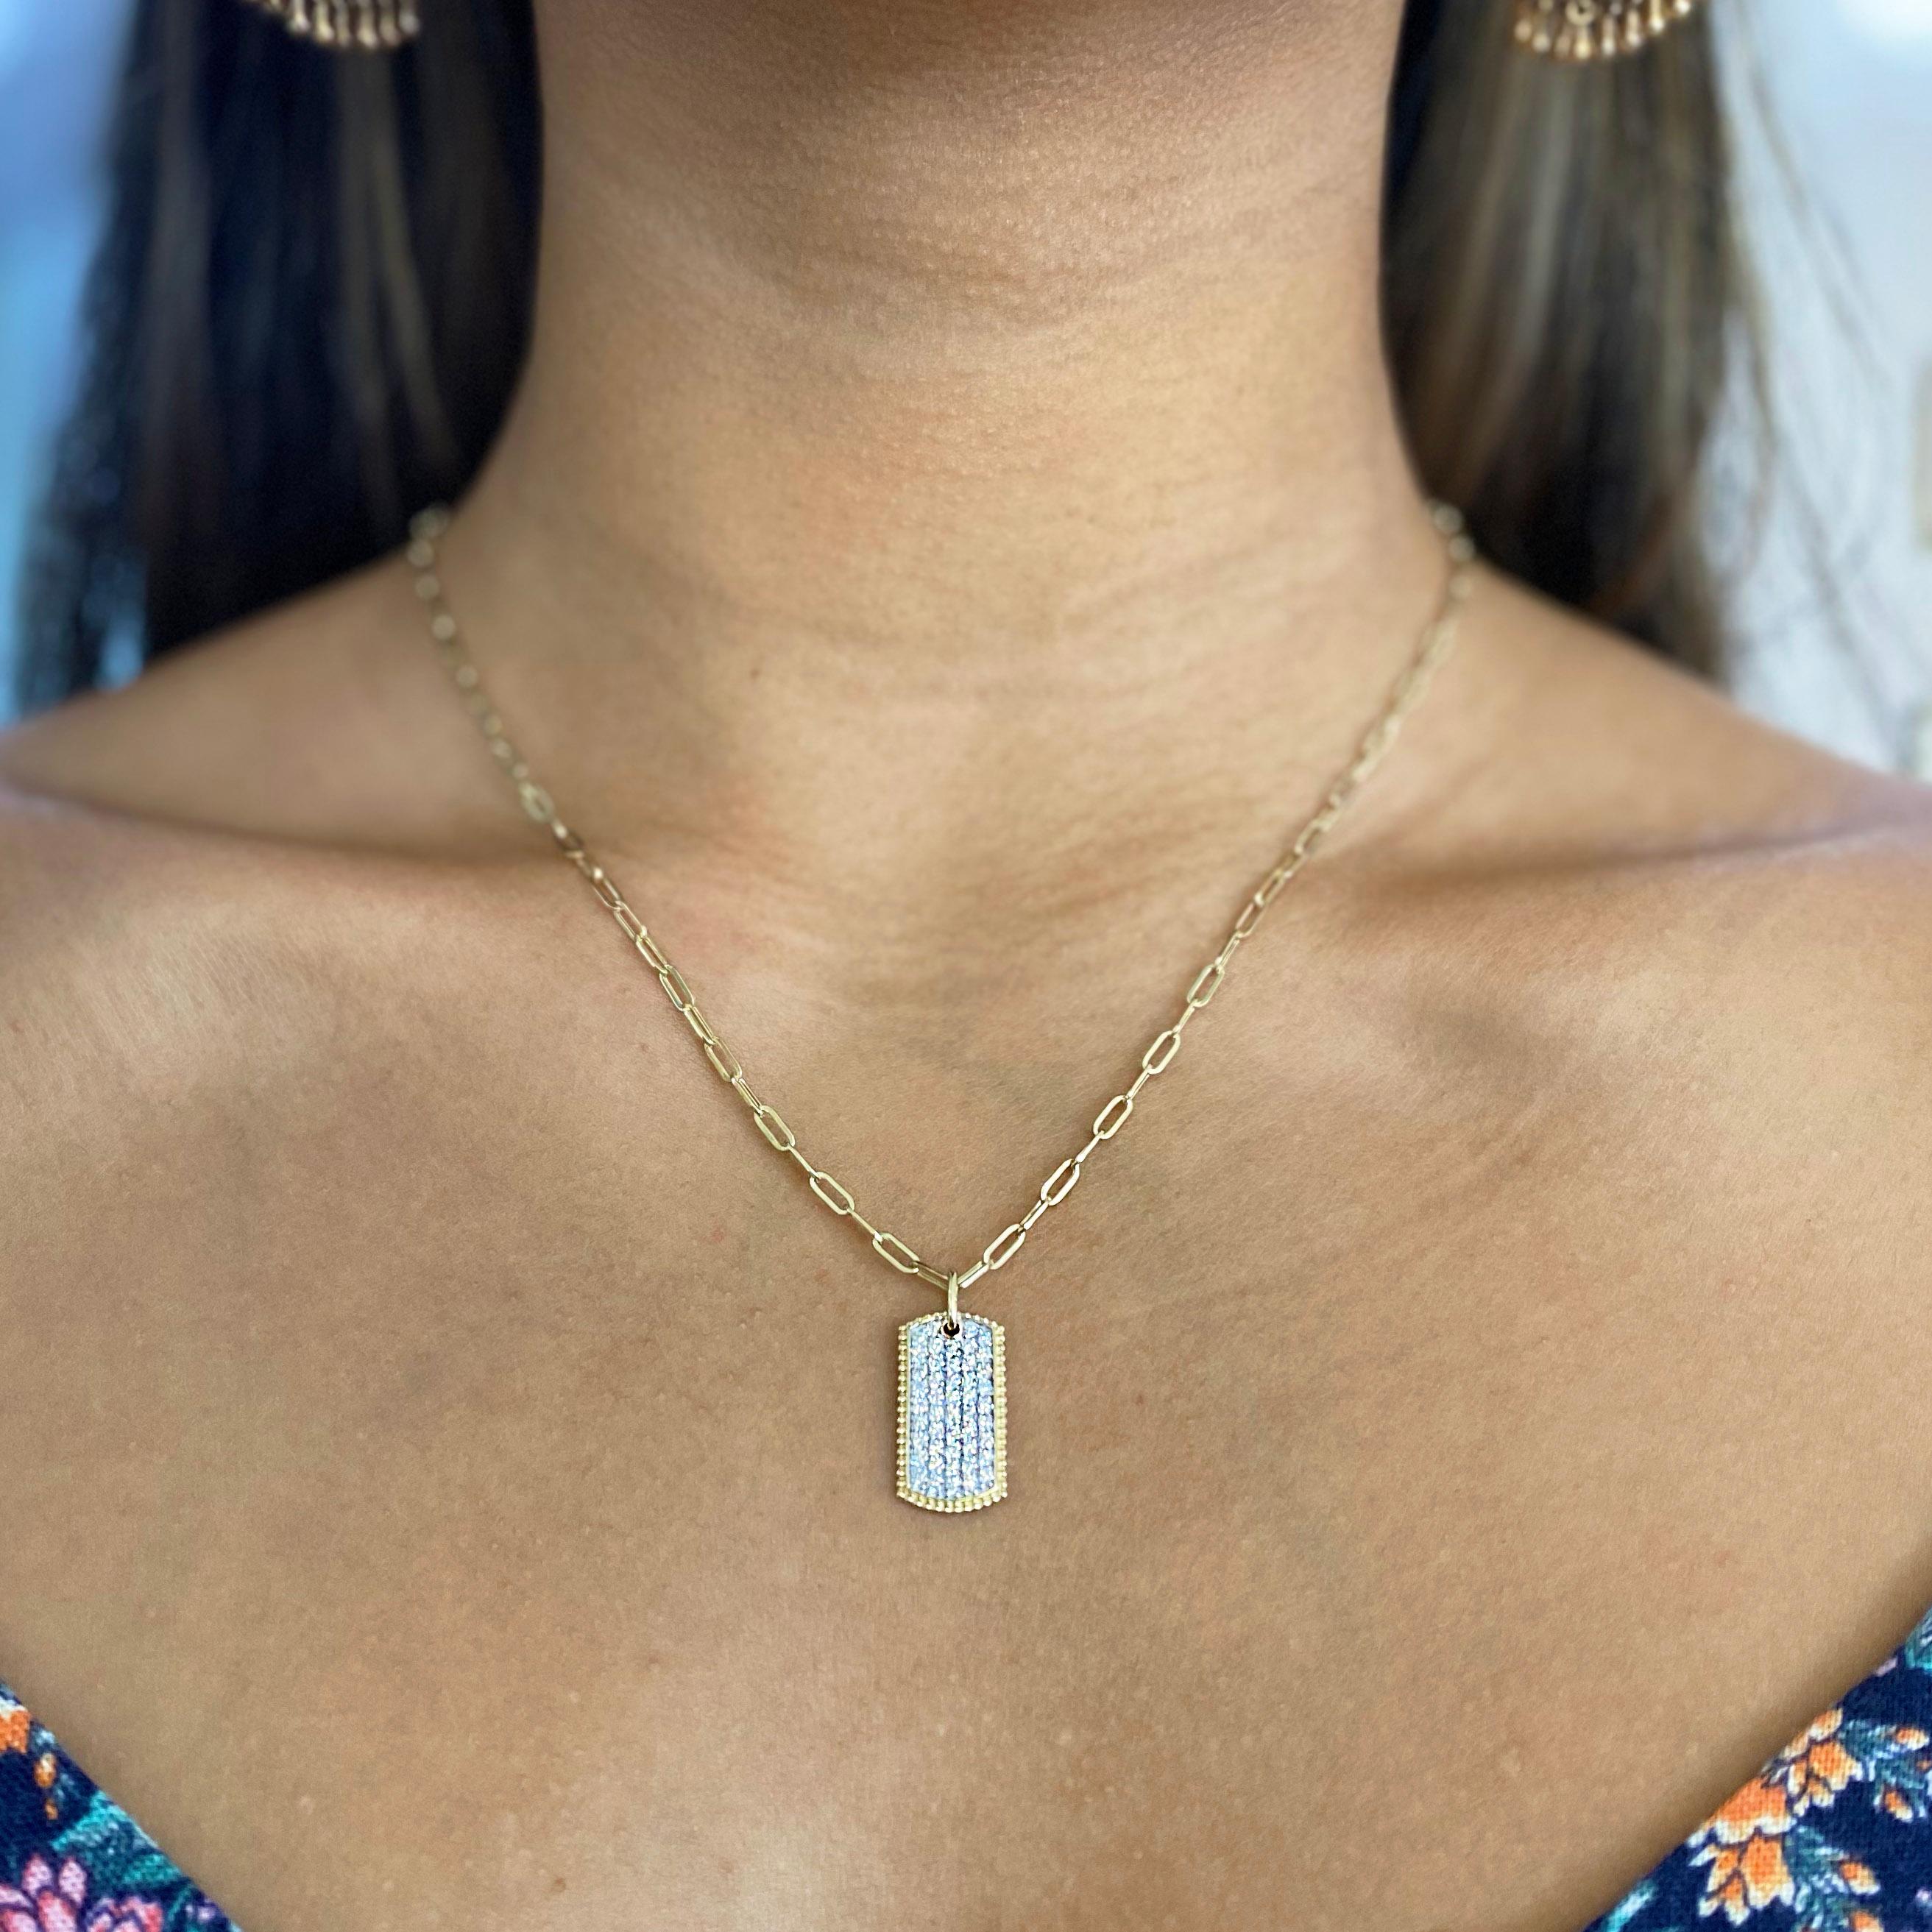 Gorgeous pave diamond paperclip necklace! The paperclip chain is the hottest trend in today's fashion. This is paired with our latest diamond pendant design, a pave dog tag! The genuine, natural diamonds are set in white gold pave prong settings